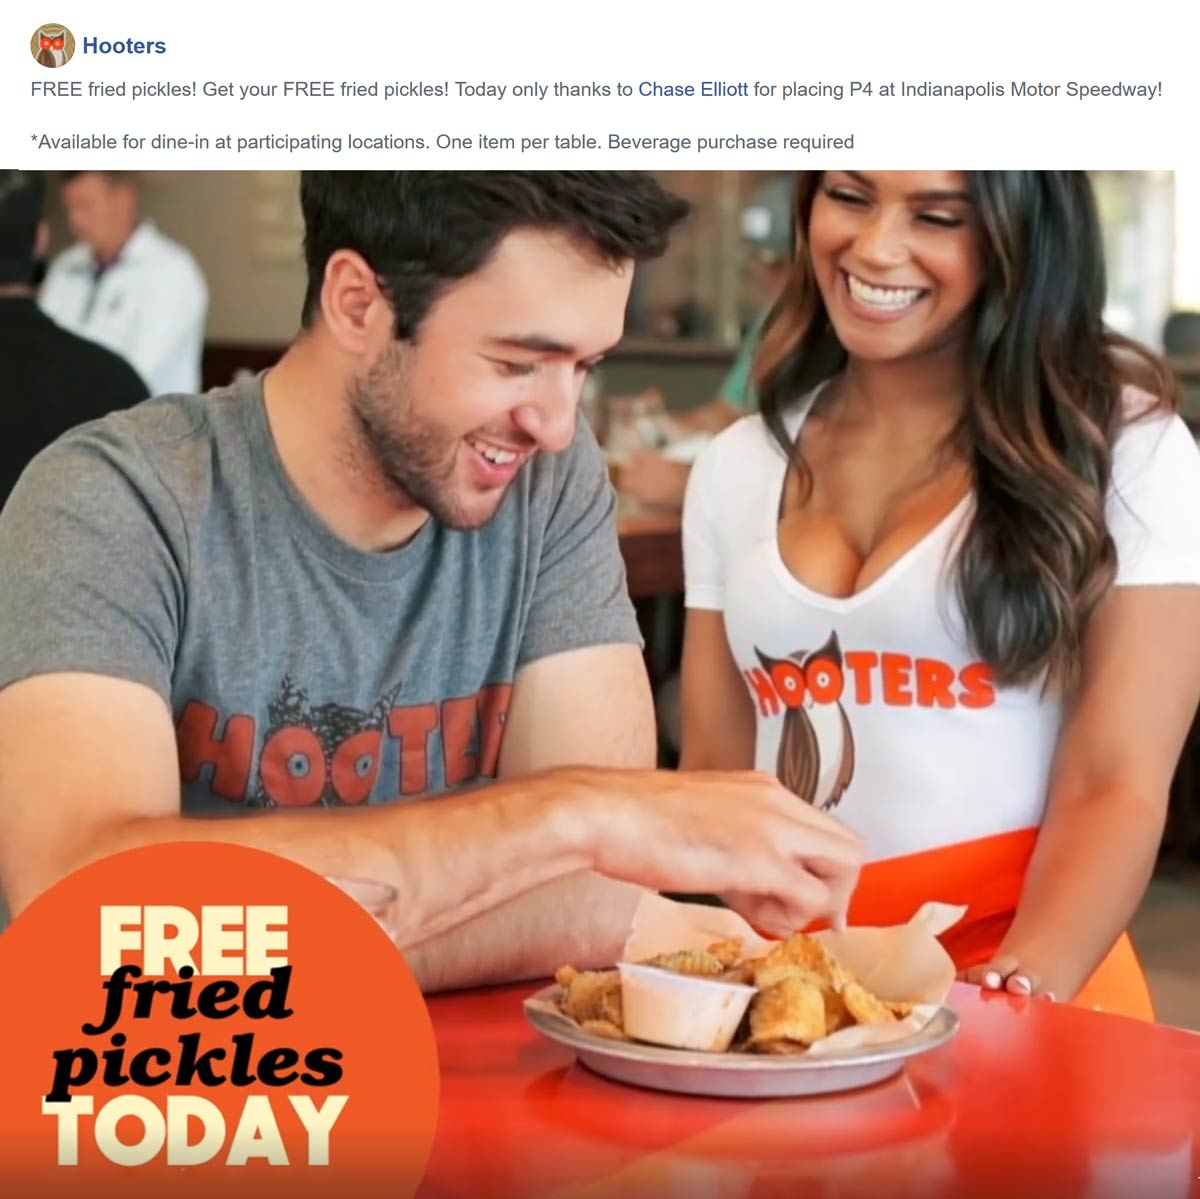 Hooters restaurants Coupon  Free fried pickles appetizer today at Hooters #hooters 